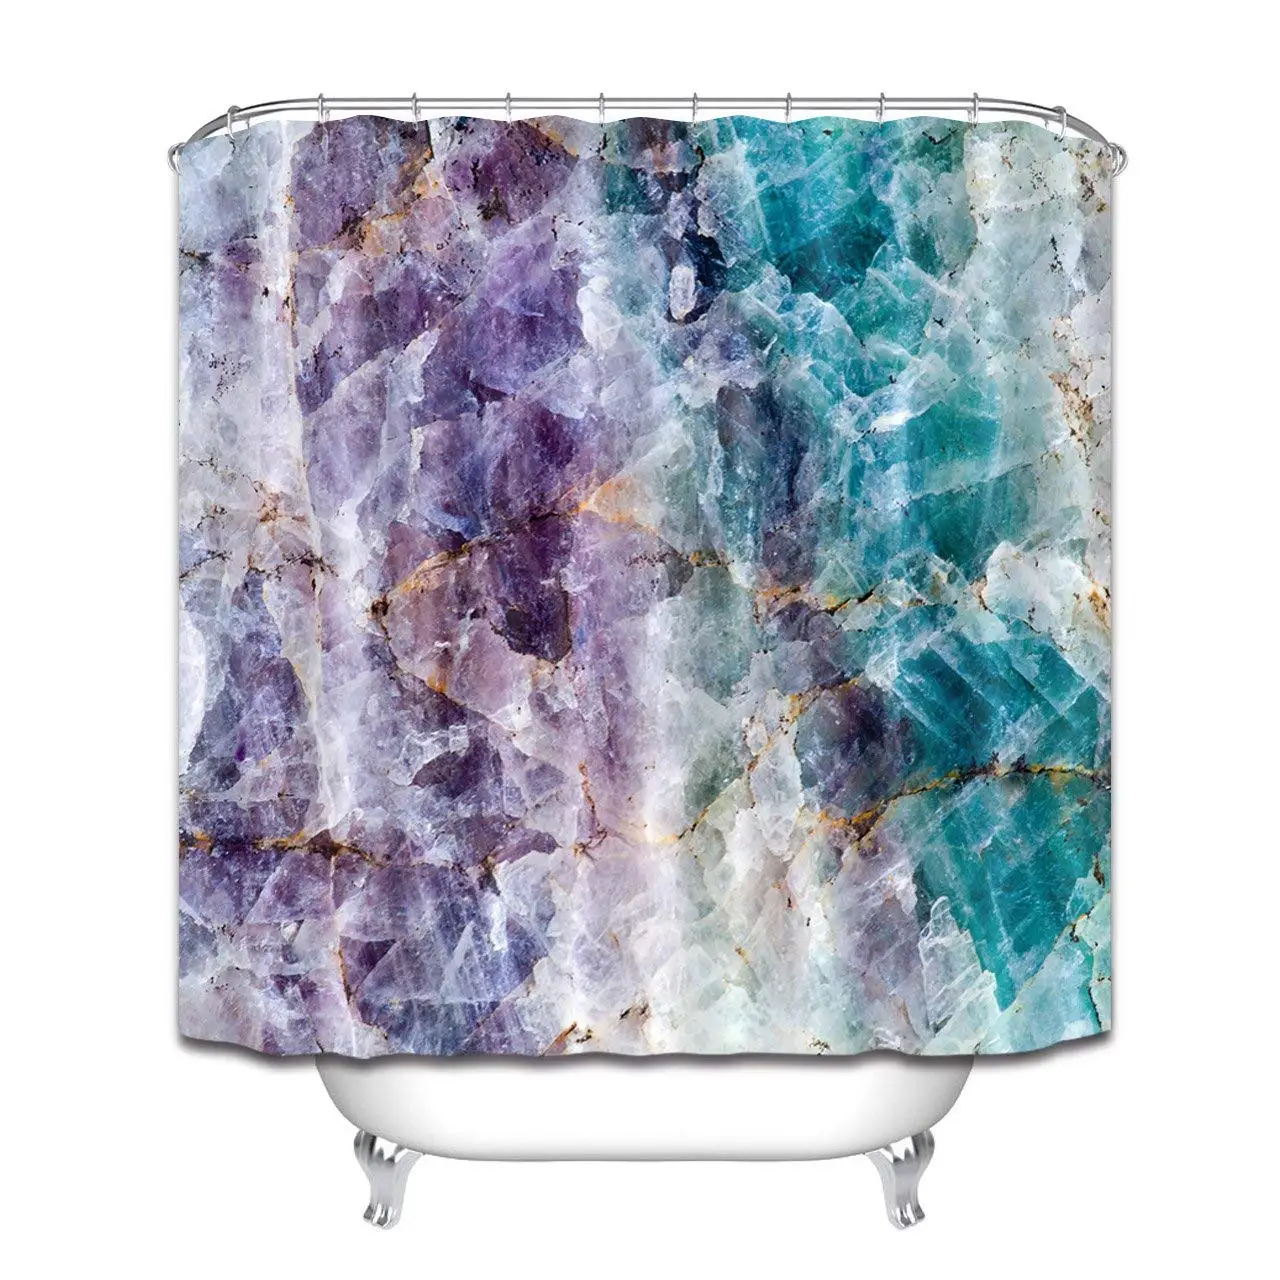 

Marble Shower Curtain Outer Space Galaxy Print Mysterious Universe Pattern Bath Curtain for Home Decor Fabric